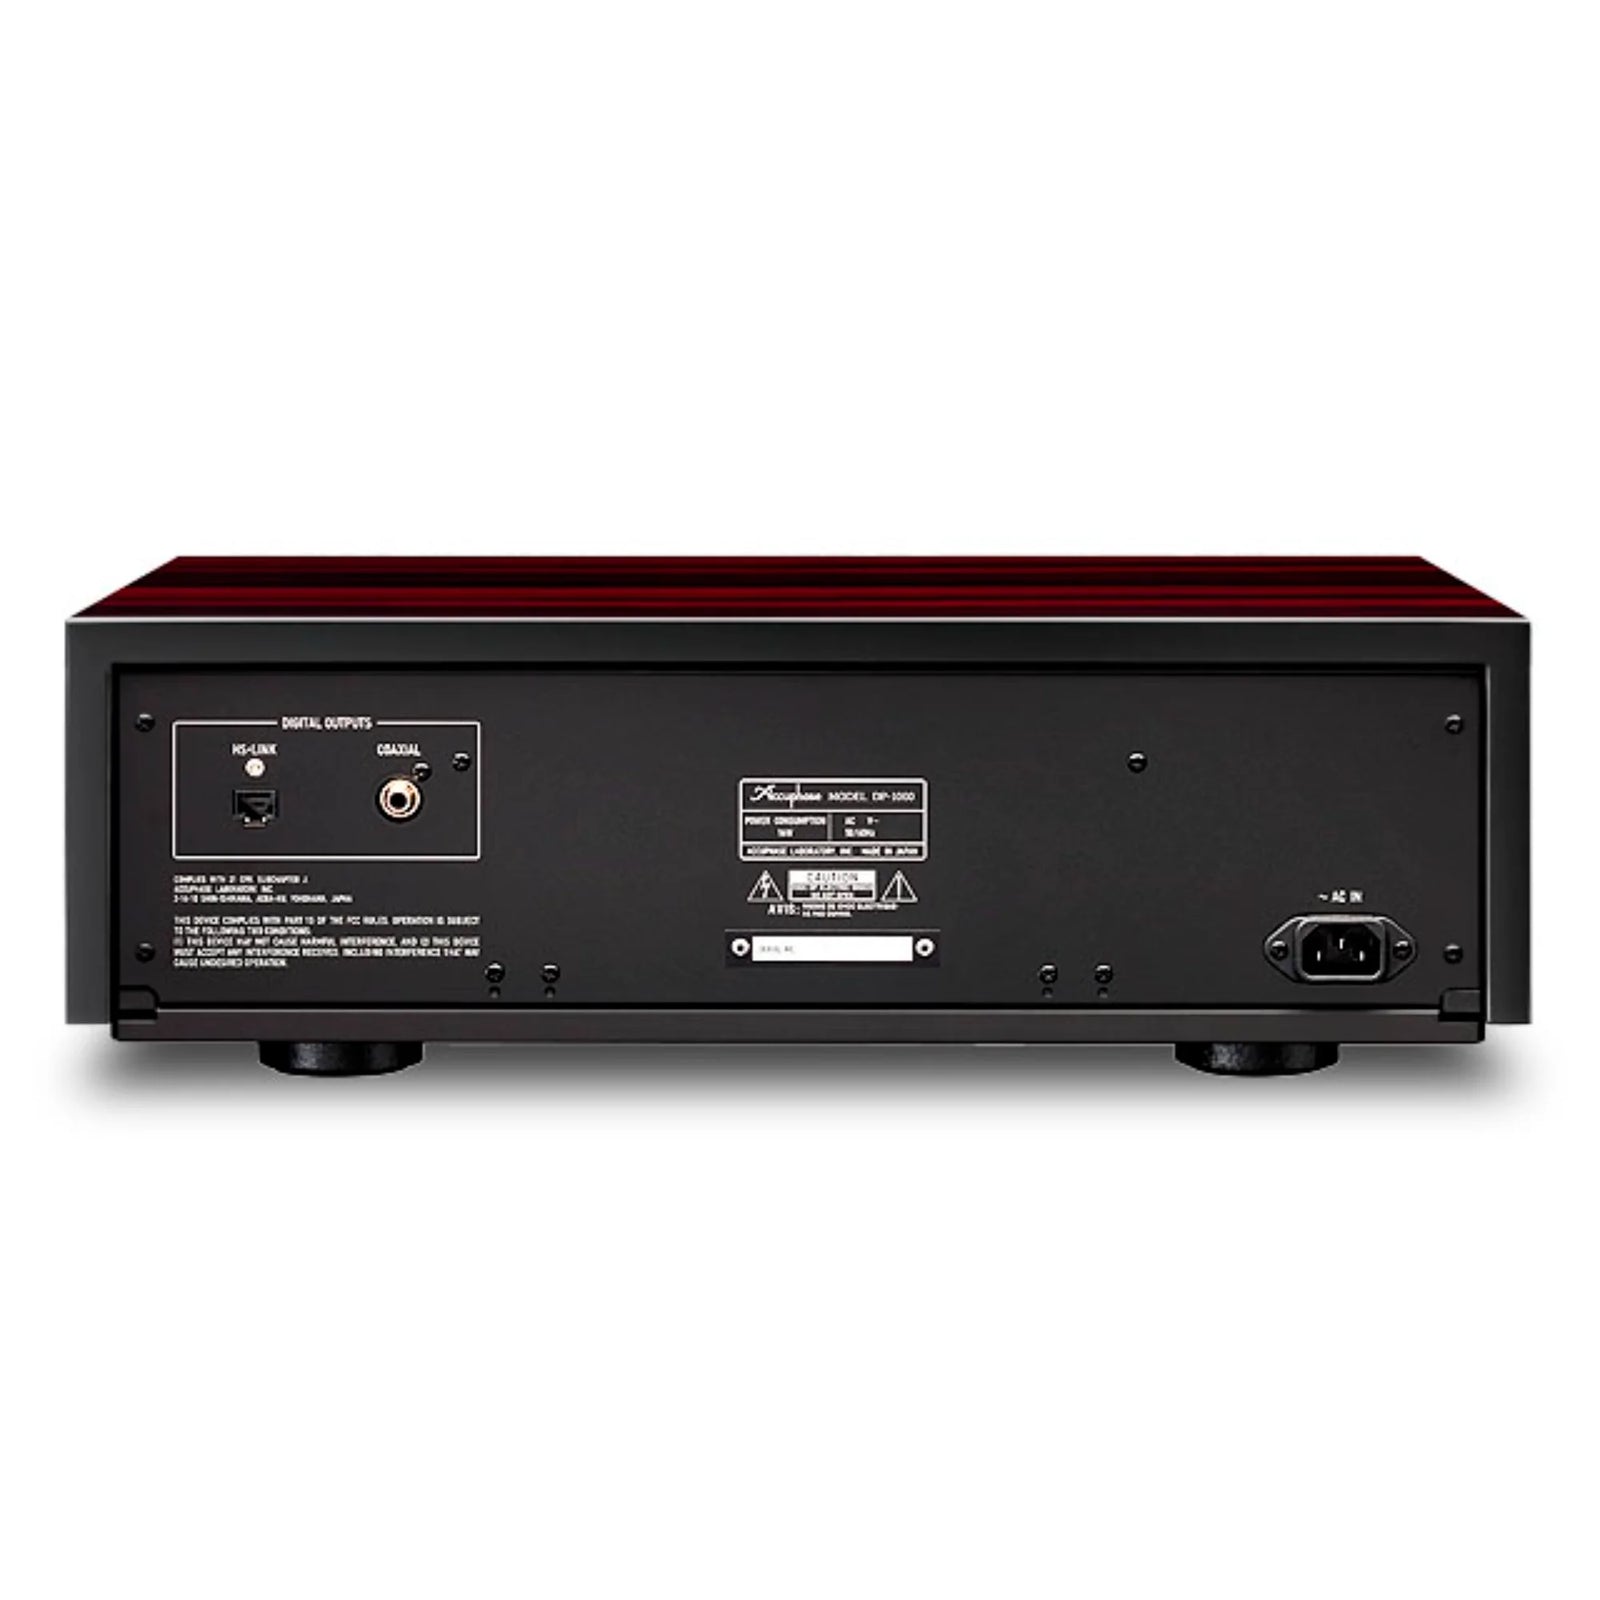 Accuphase DP-1000 SACD/CD Transport Product & Specification The DP-1000 is the culmination of Accuphase’s 50-year pursuit of creating the ideal transporter. This high-rigidity, high-precision drive is equipped with a silent and elegant disc loading mechanism.